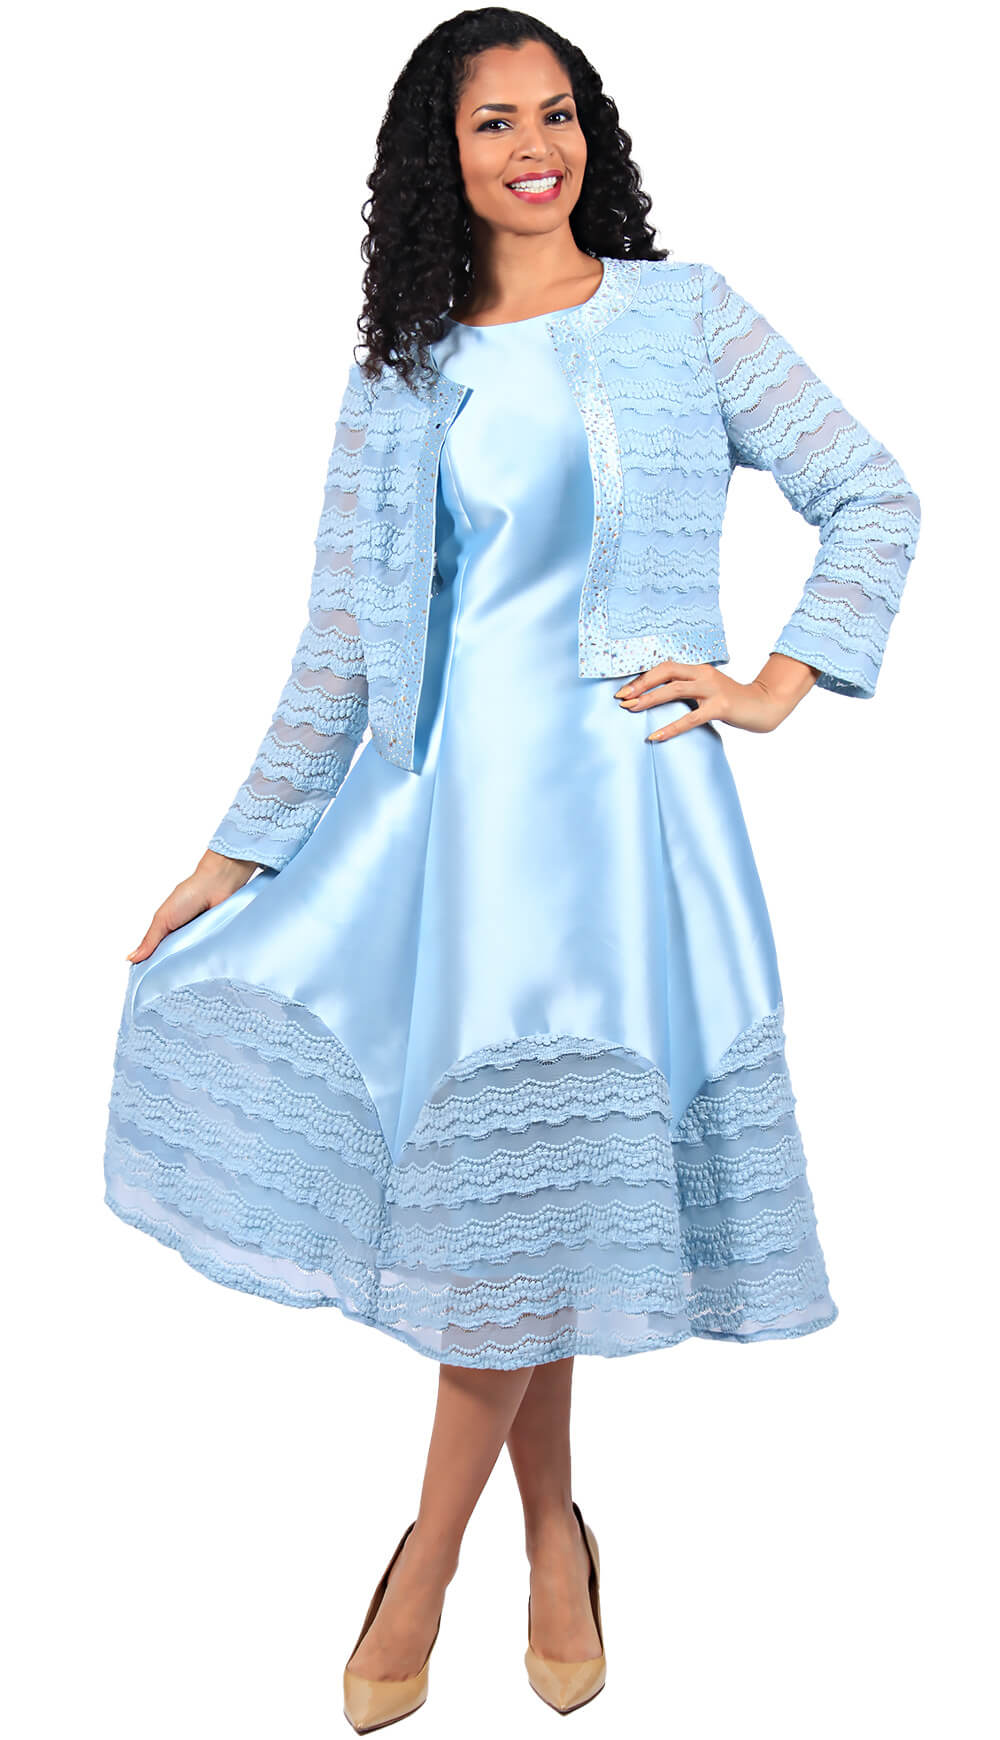 Diana Couture Dress 8686C-Sky Blue - Church Suits For Less